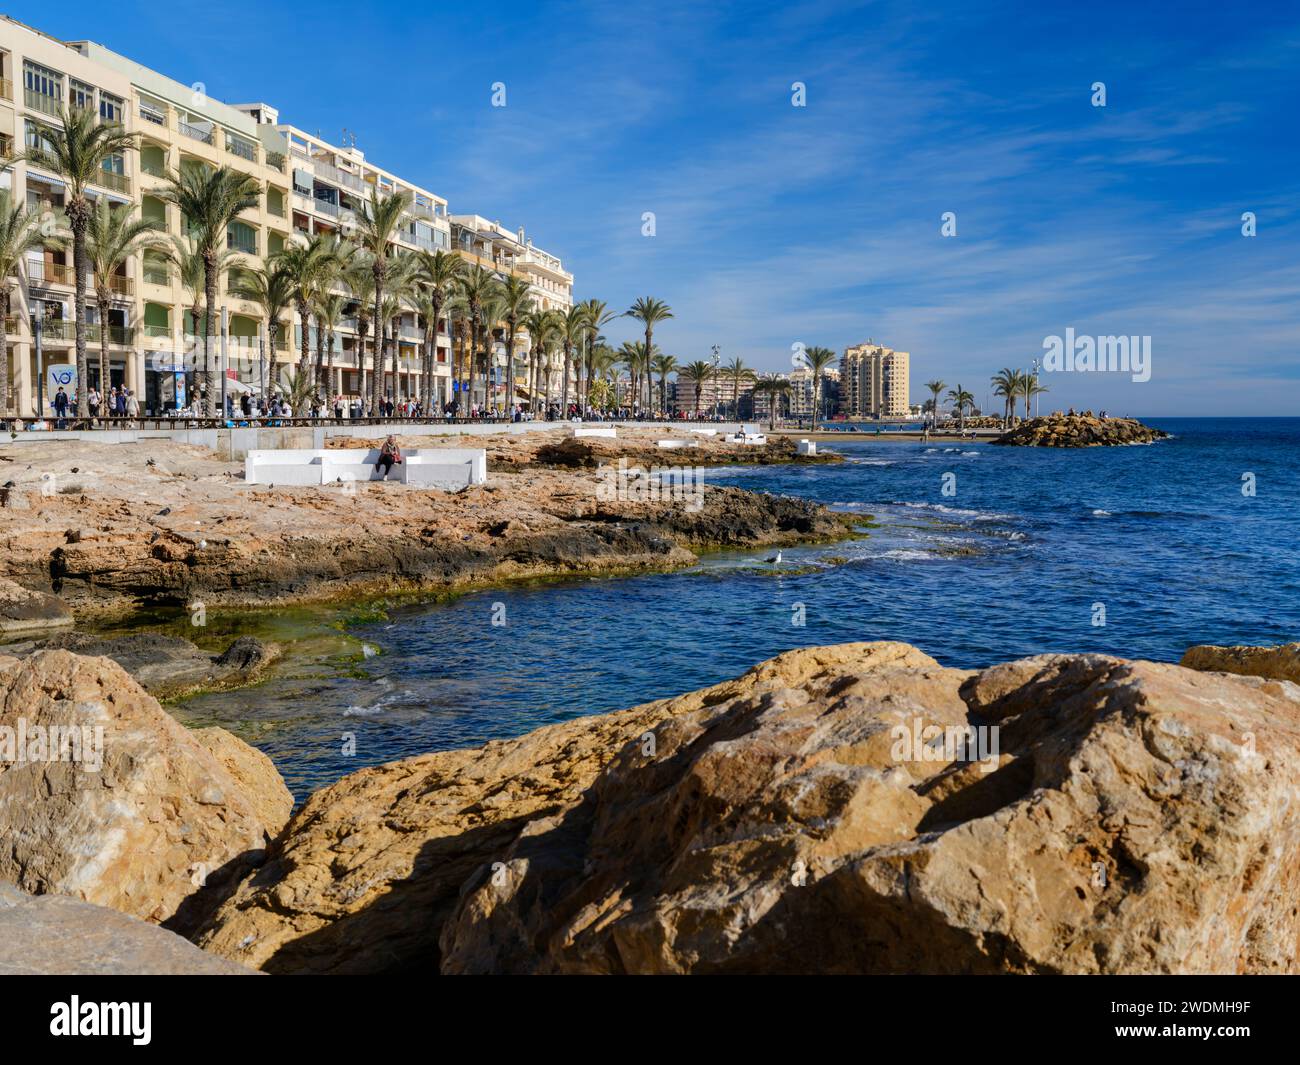 Torrevieja, Alicante, Spain. A beautiful day in mid january on the seafront at Torrevieja as people enjoy a gentle breeze off the Mediterranean sea. Stock Photo